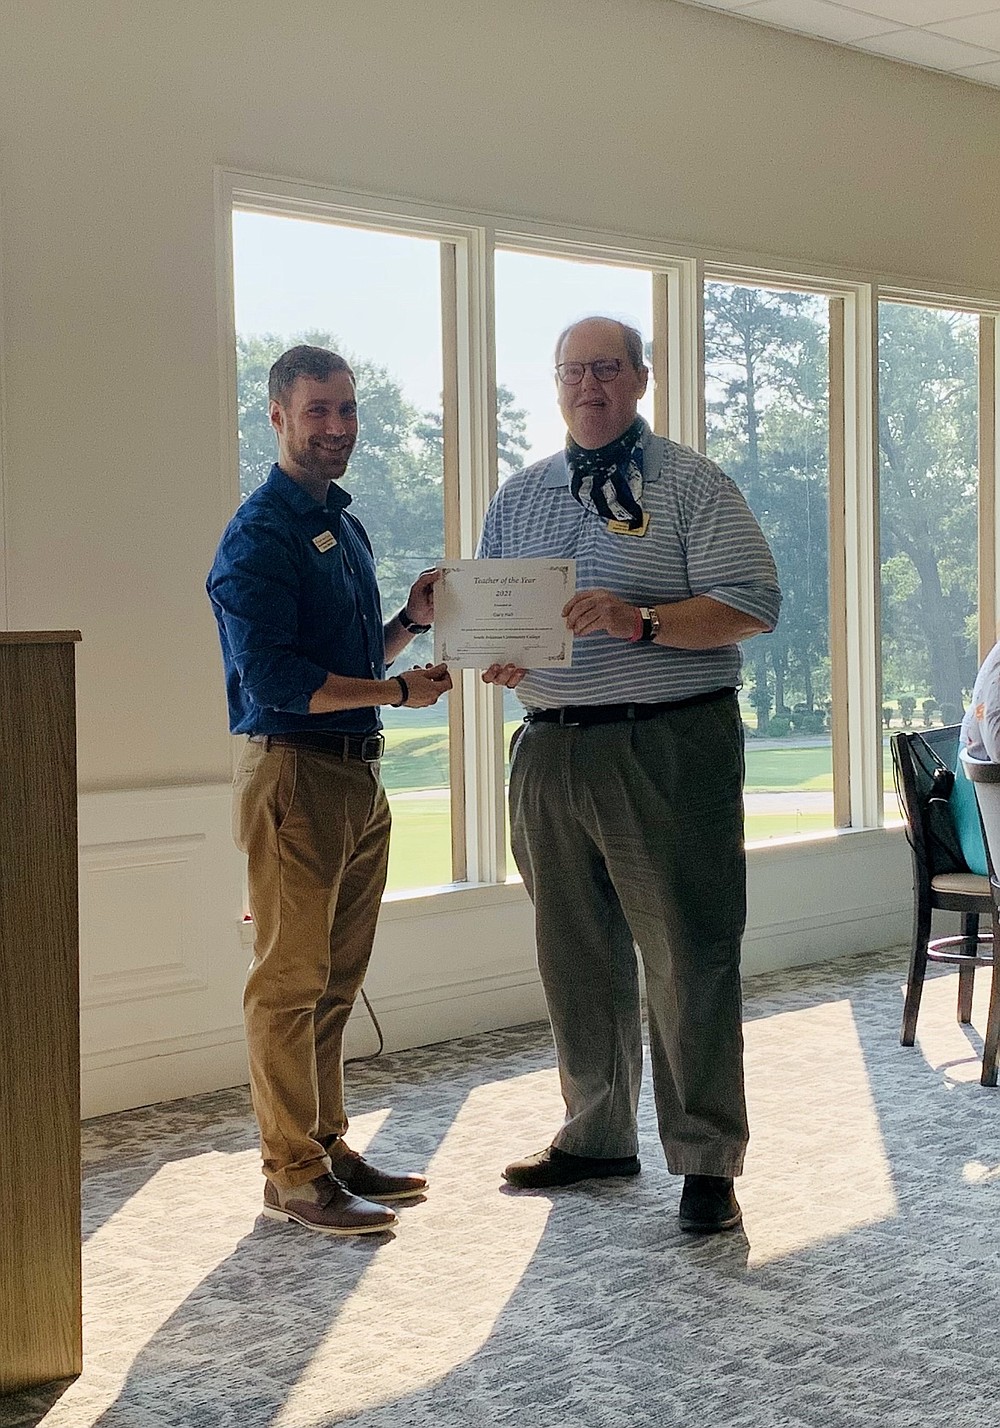 Jaren Books, membership and events coordinator for the Chamber of Commerce, presents Gary Hall, director of South Arkansas Community College's media and arts program, with a teacher of the year certificate during a New Teachers Breakfast at the El Dorado Golf & Country Club. (Contributed)